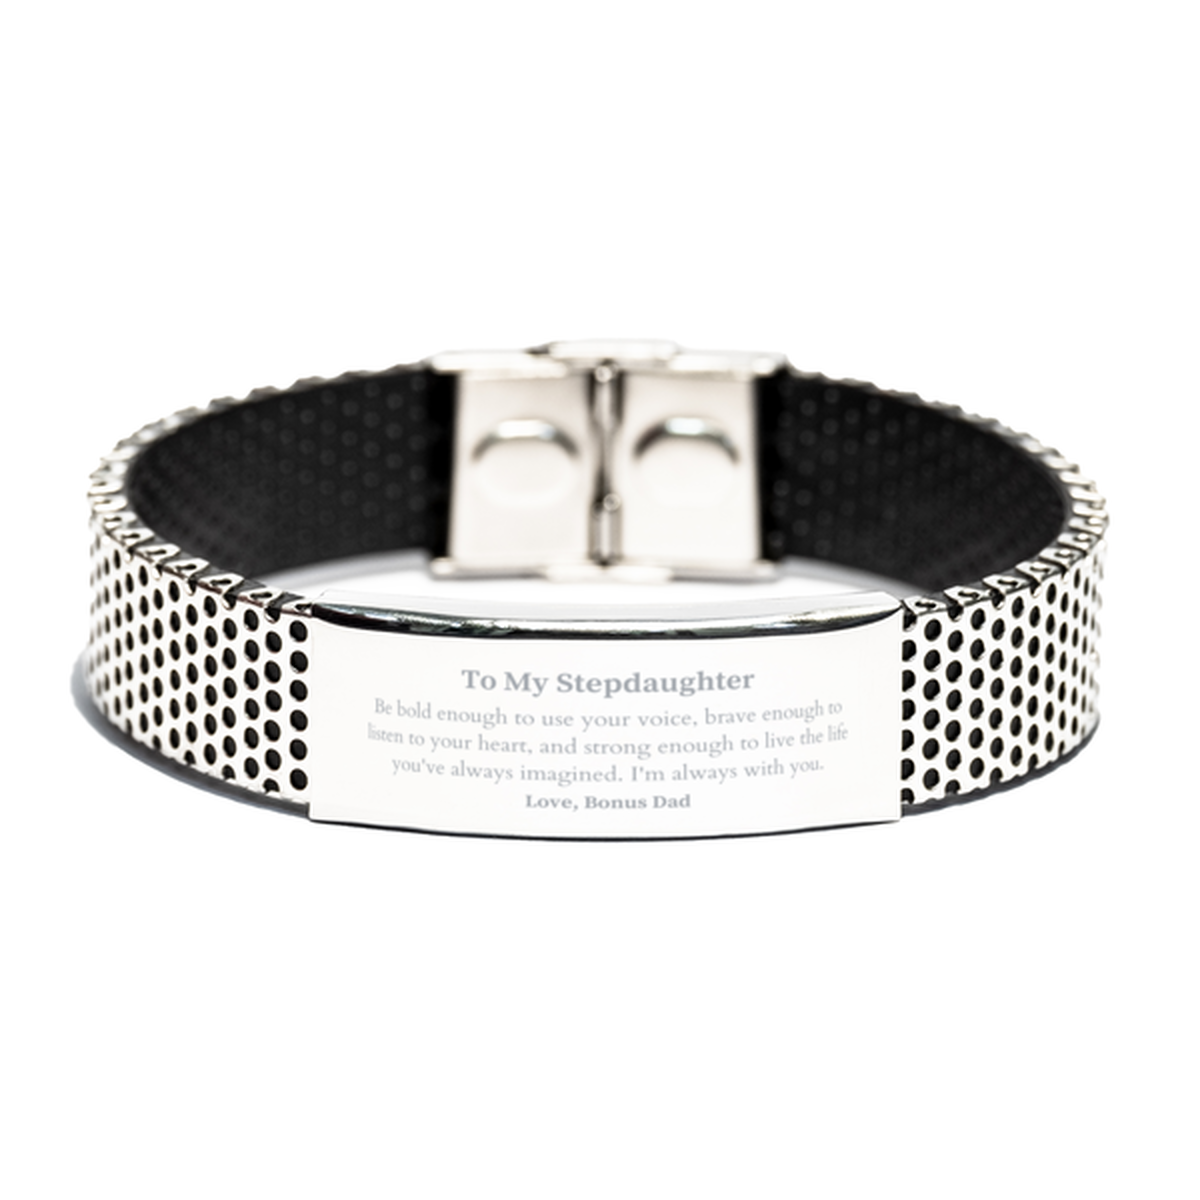 Keepsake Stepdaughter Stainless Steel Bracelet Gift Idea Graduation Christmas Birthday Stepdaughter from Bonus Dad, Stepdaughter Be bold enough to use your voice, brave enough to listen to your heart. Love, Bonus Dad